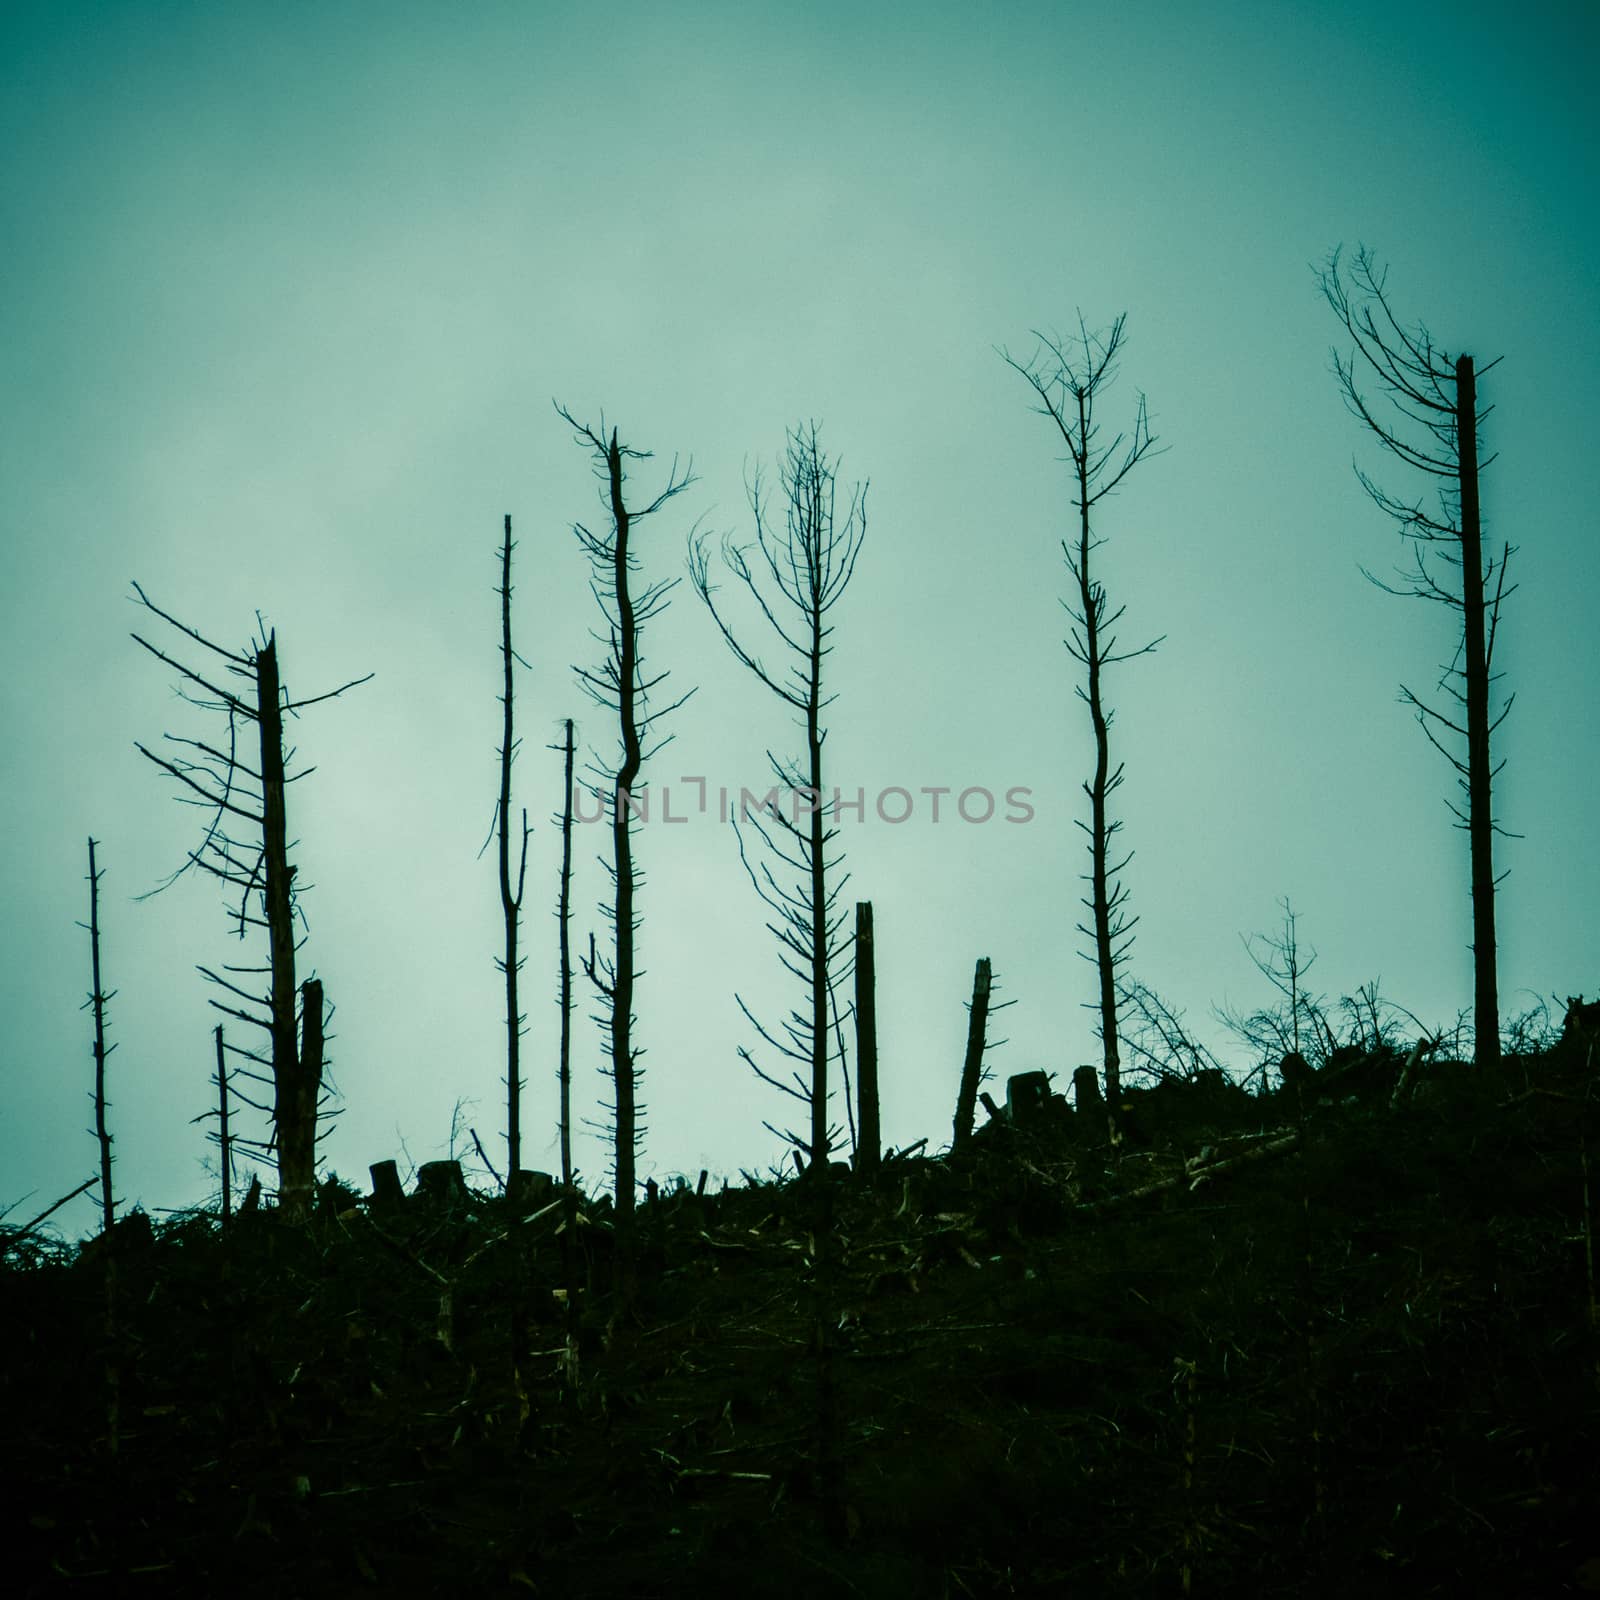 Detai Of Dead Trees In A Forest After The Devastation Of A Forest Fire